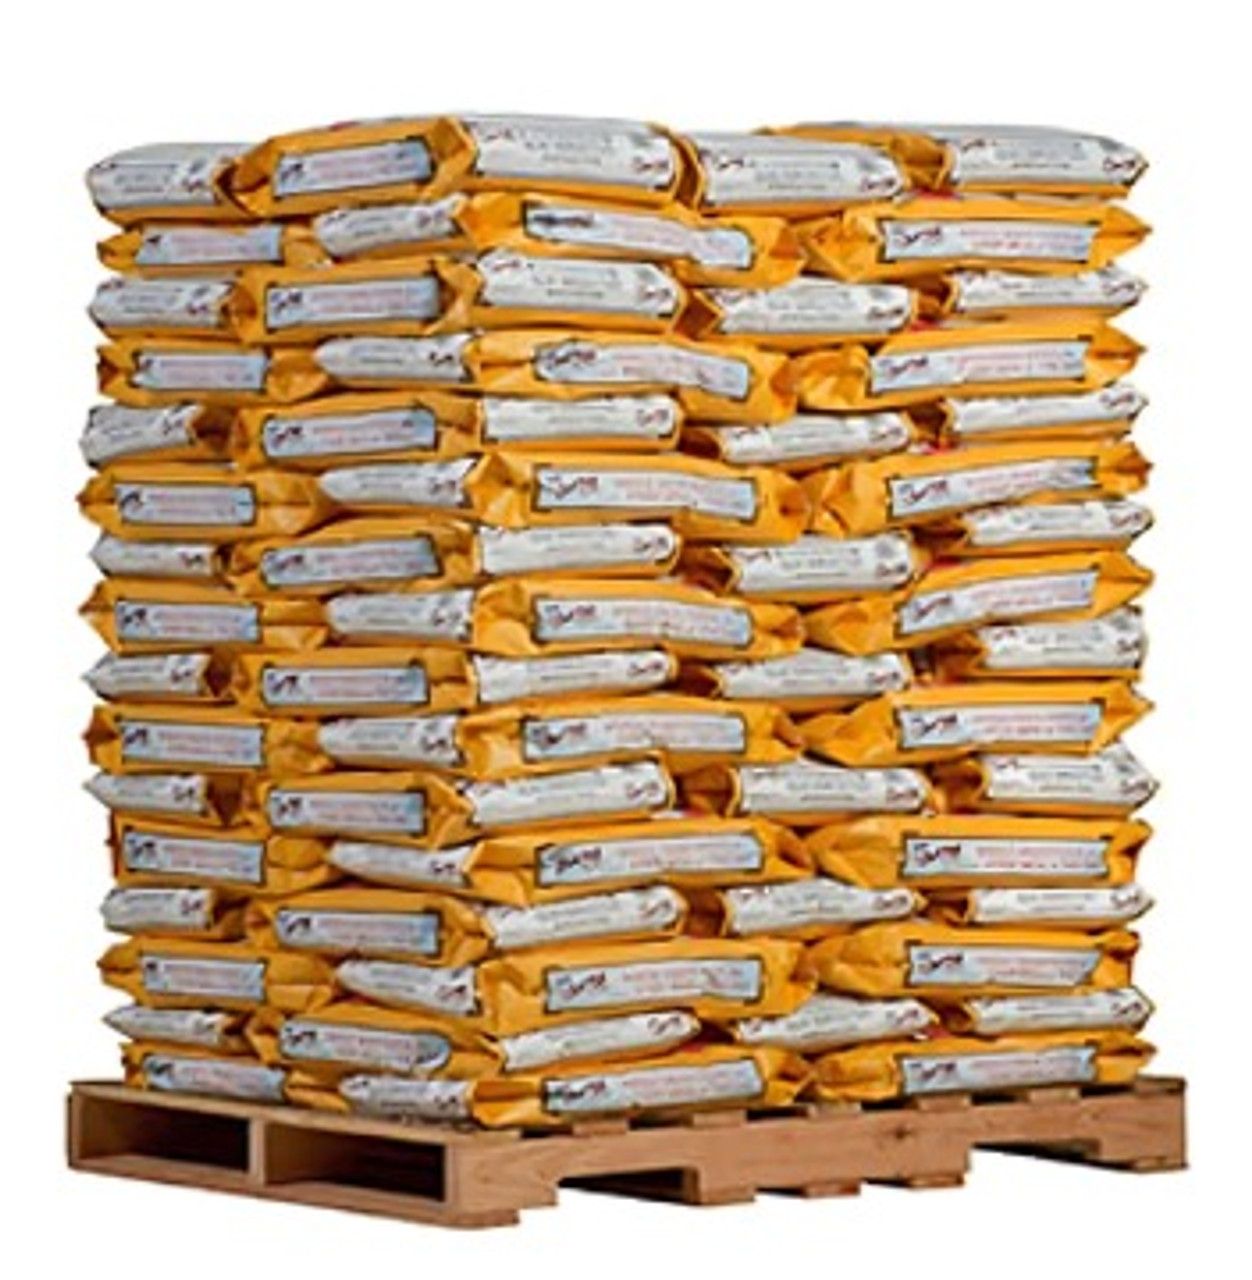 Bob's Red Mill 25 lbs. (11.34 kg) Unbleached All-Purpose Flour (60 BAGS/PALLET) - Chicken Pieces